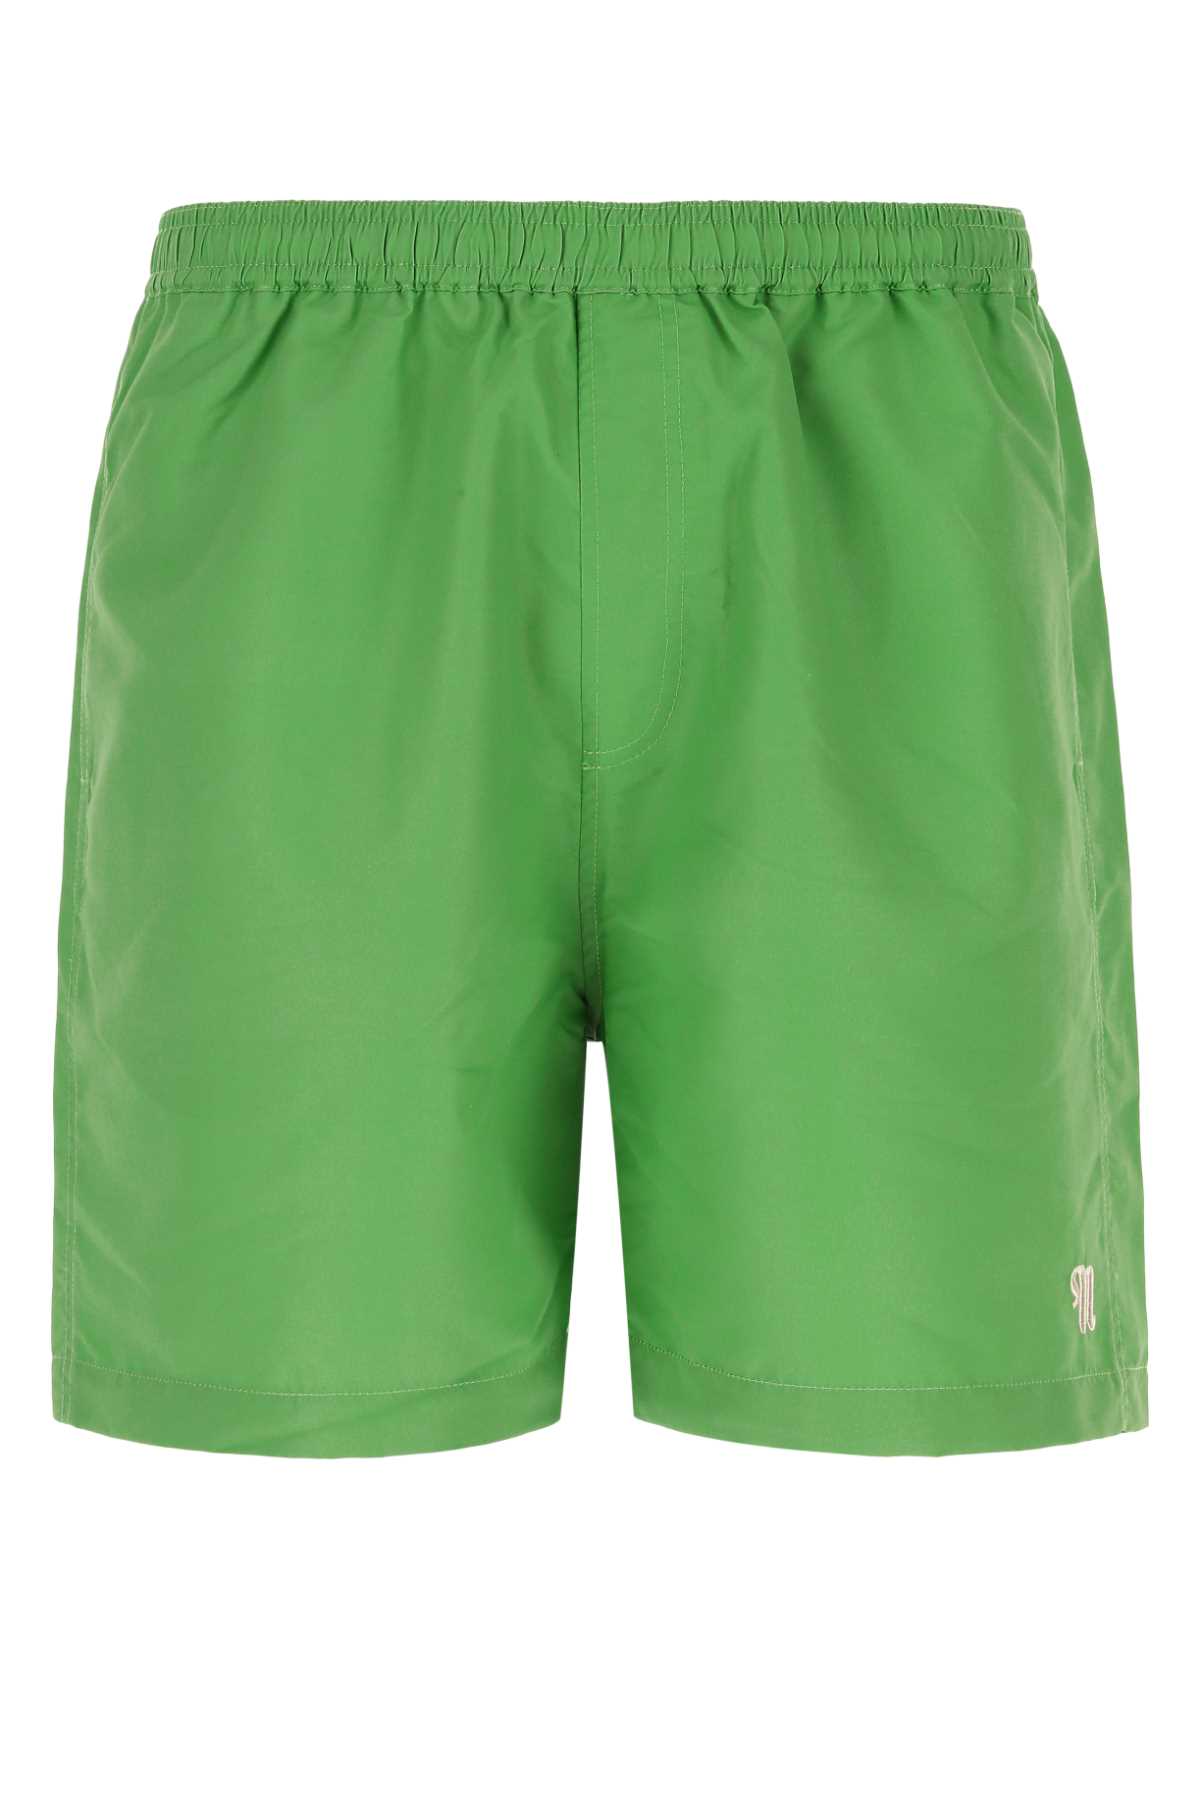 Green Polyester Blend Swimming Shorts